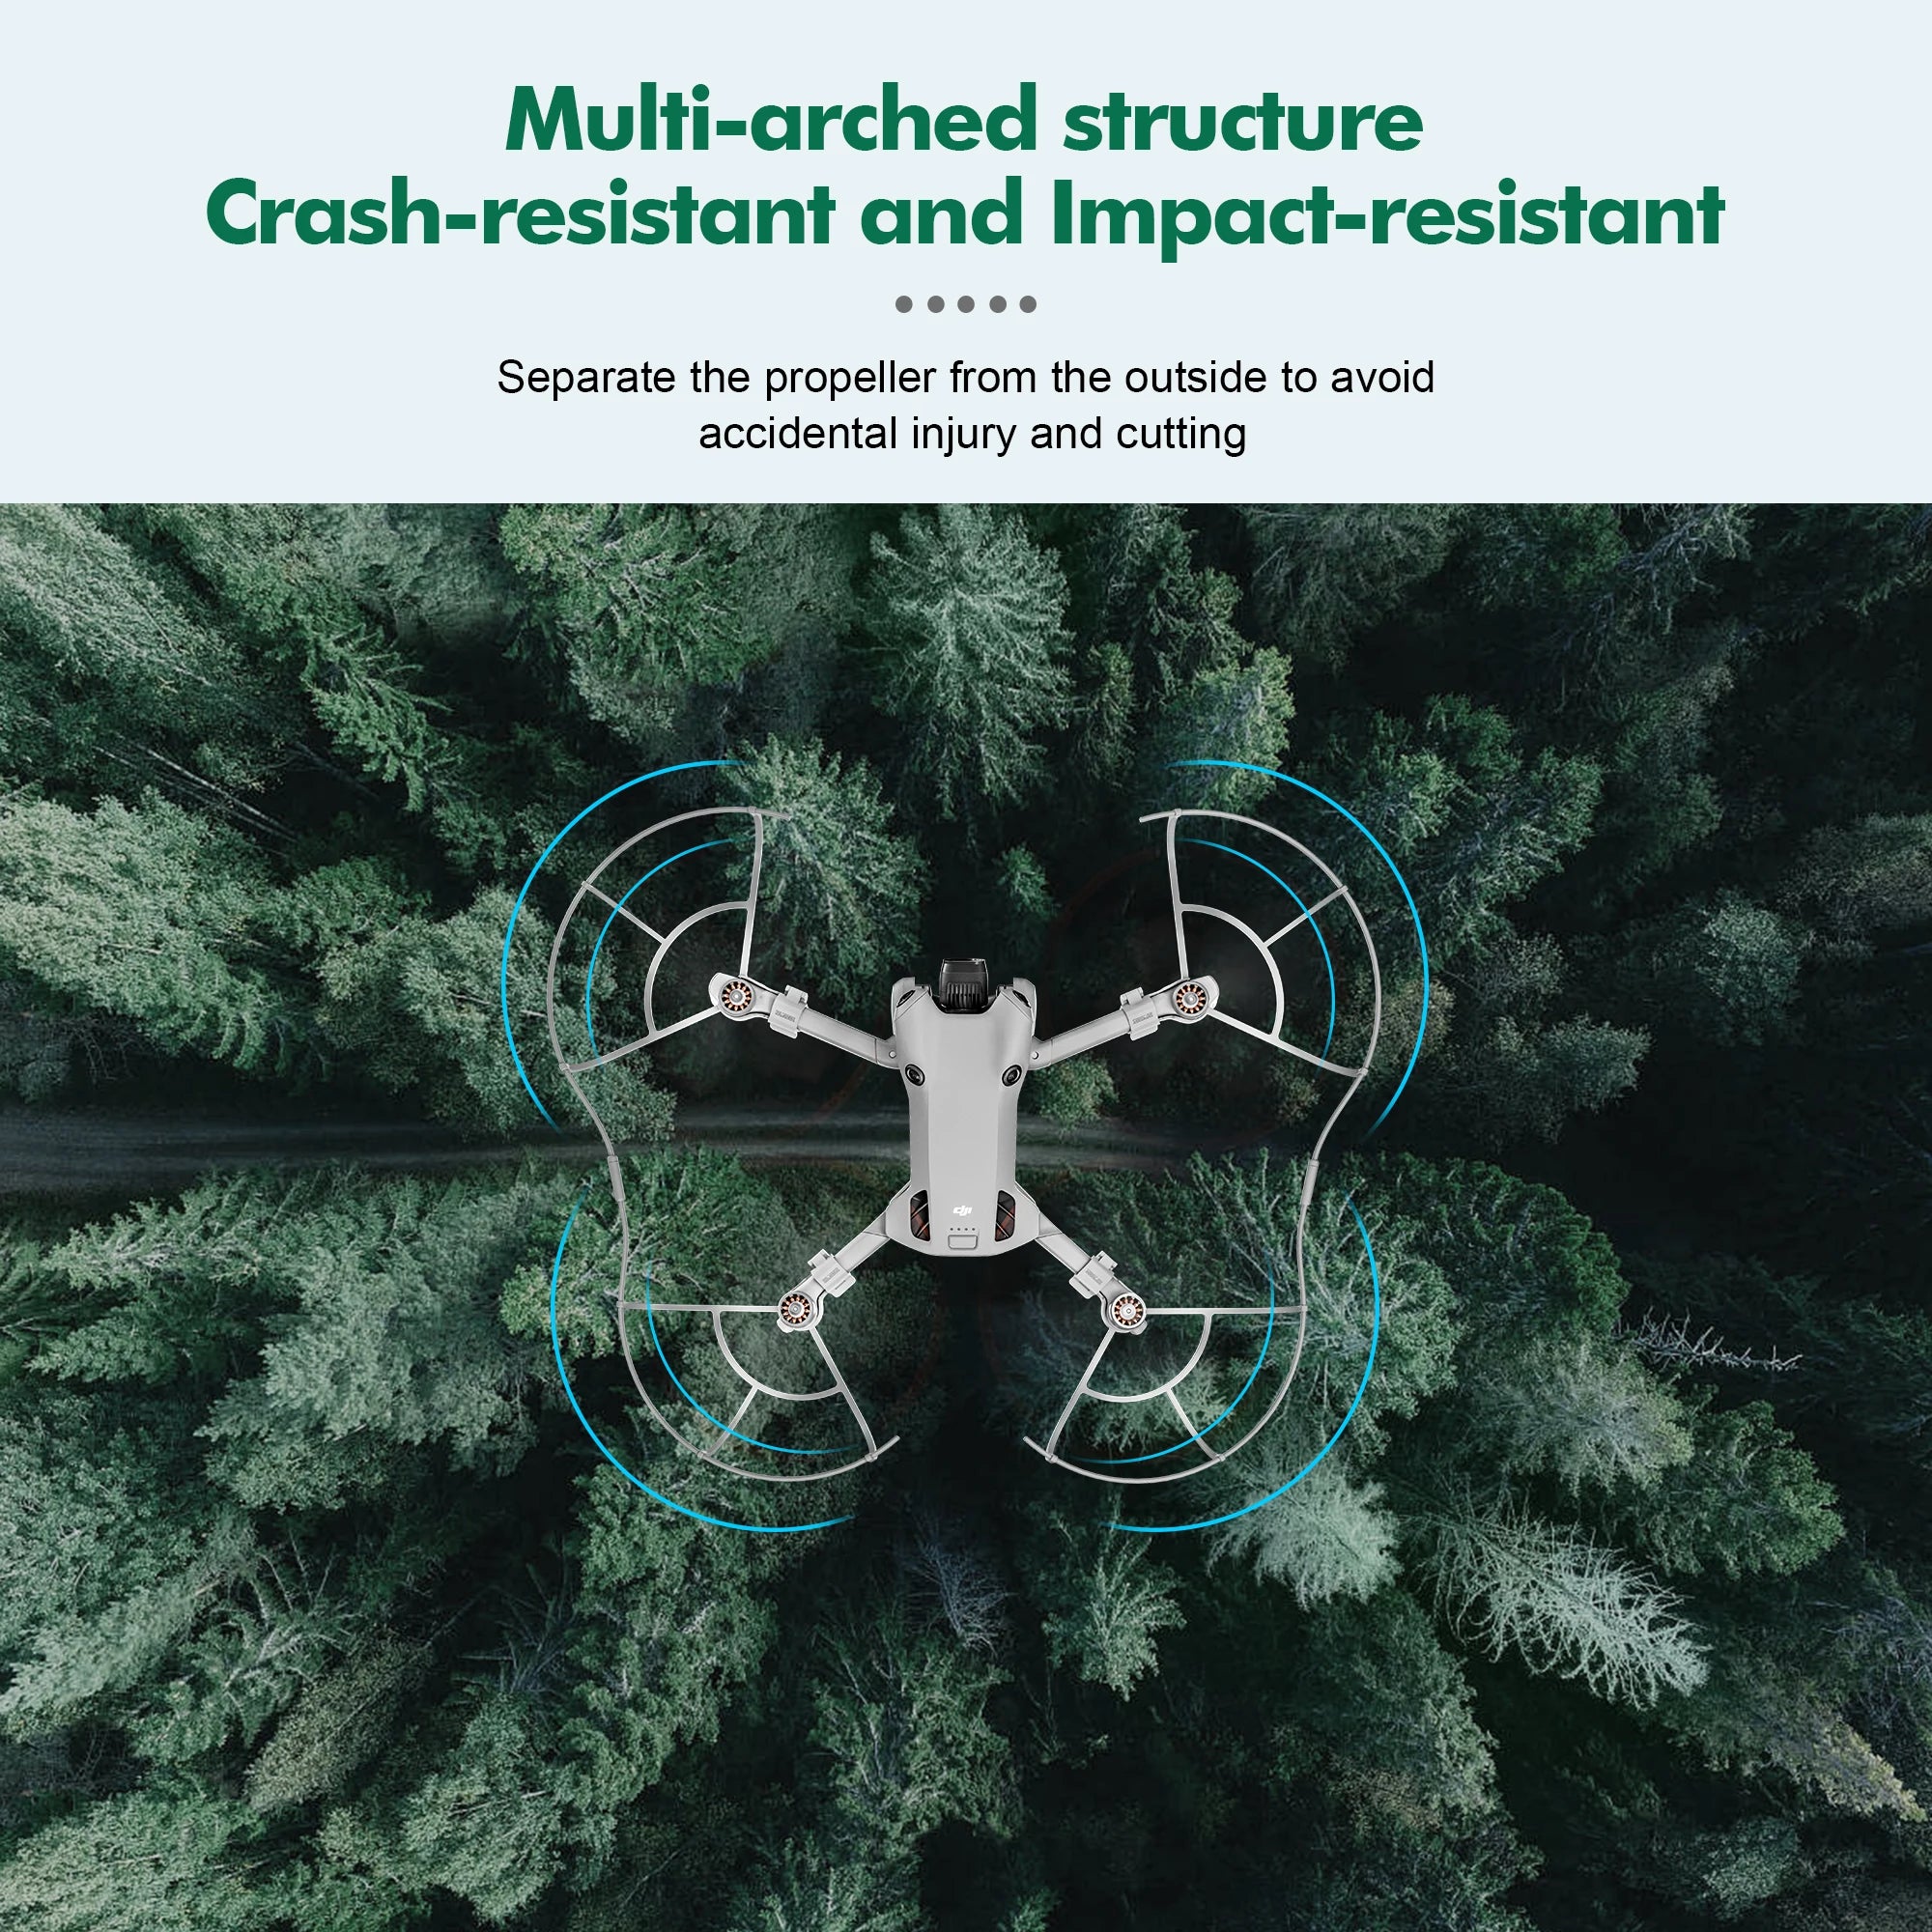 For DJI Mini 4 Pro Propeller Guard, Multi-arched structure Crash-resistant and Impact-resistant Separate the propeller from